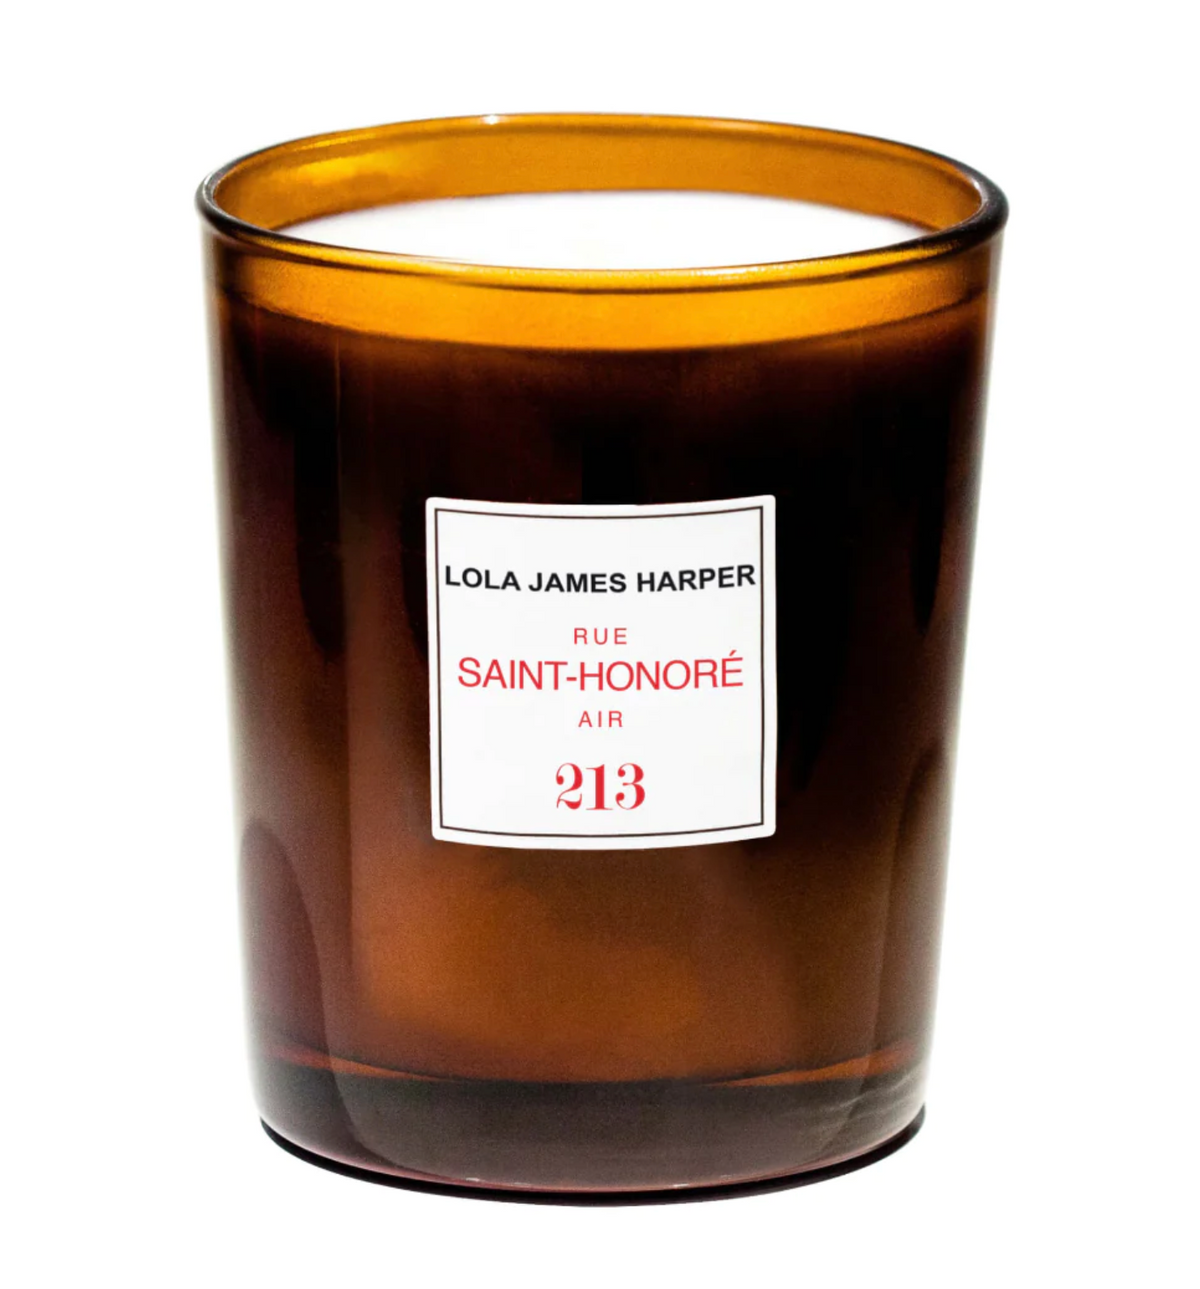 FIG TREE CANDLE